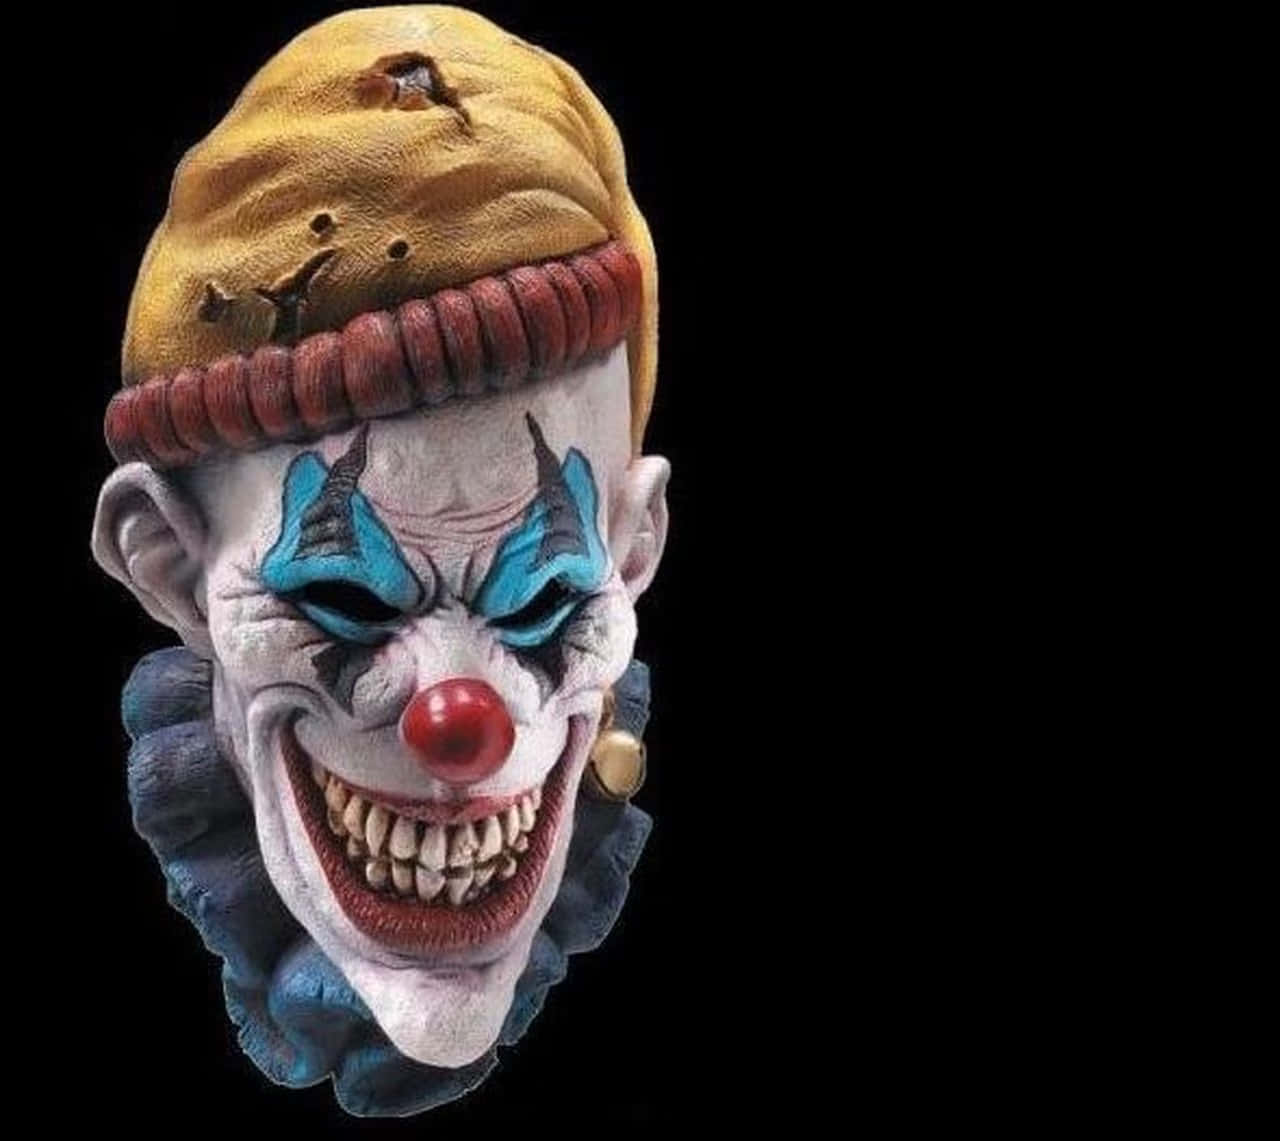 Face your fear and face the creepy clown!